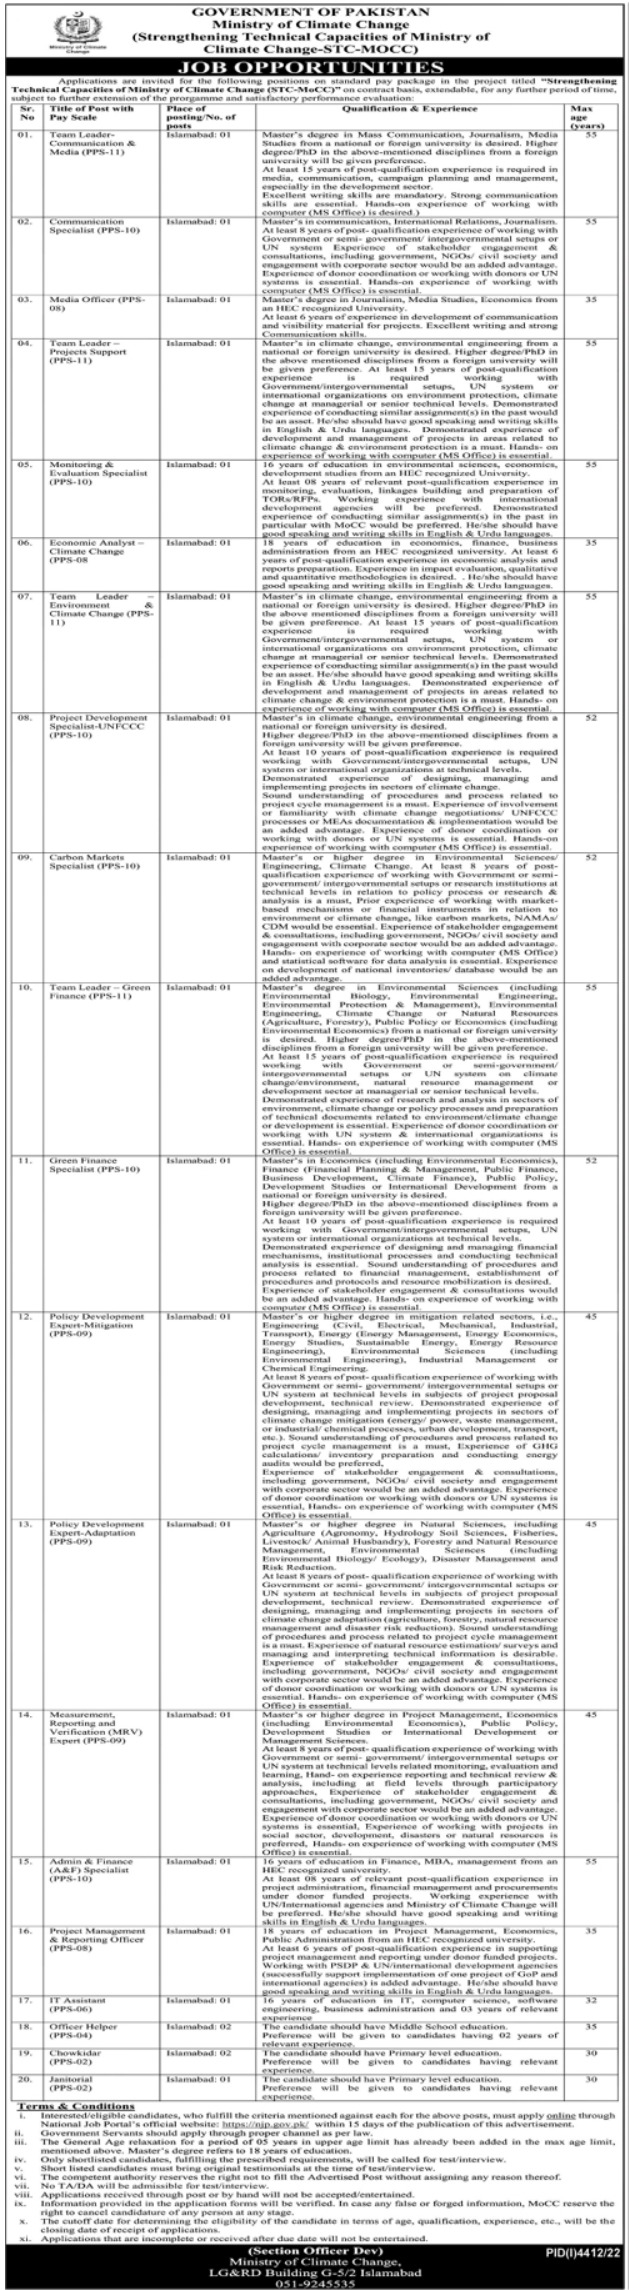 Latest STC Ministry of Climate Change Jobs In Islamabad